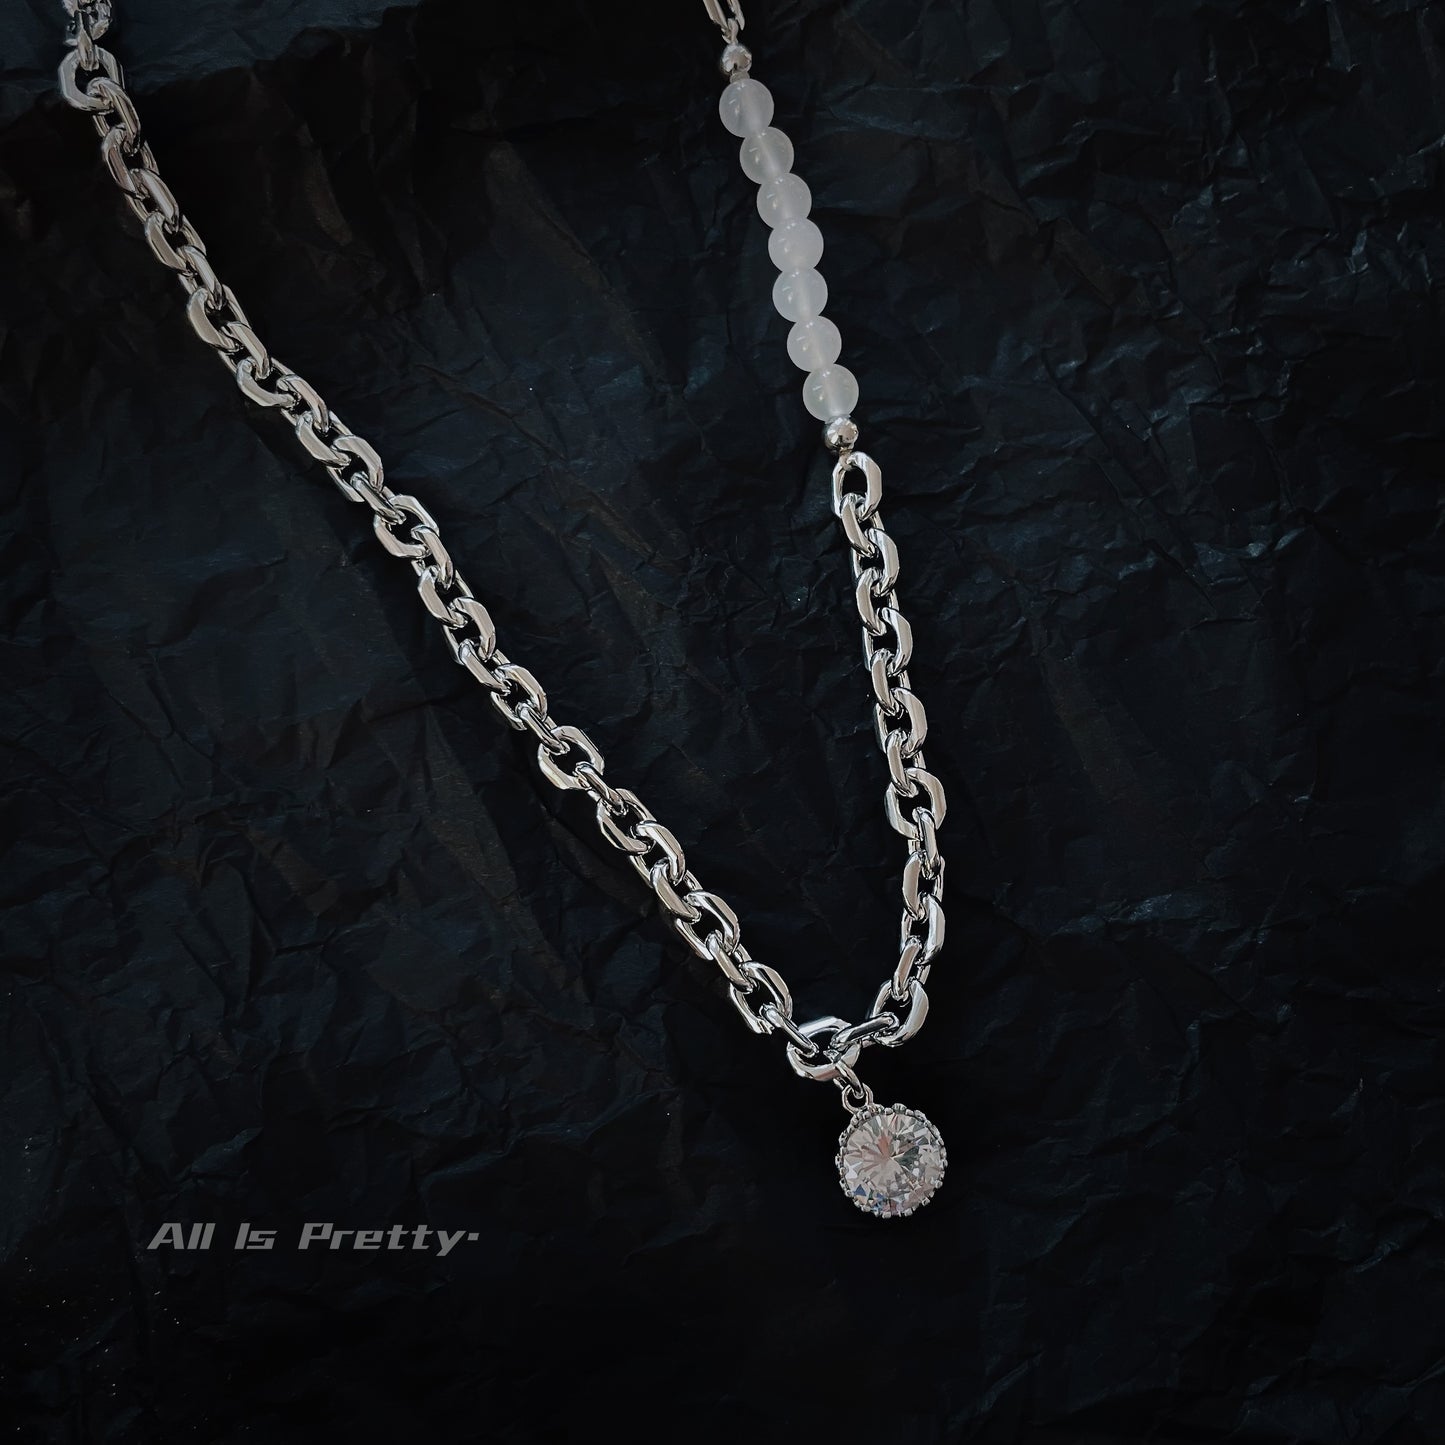 Crystal pendant chain necklace